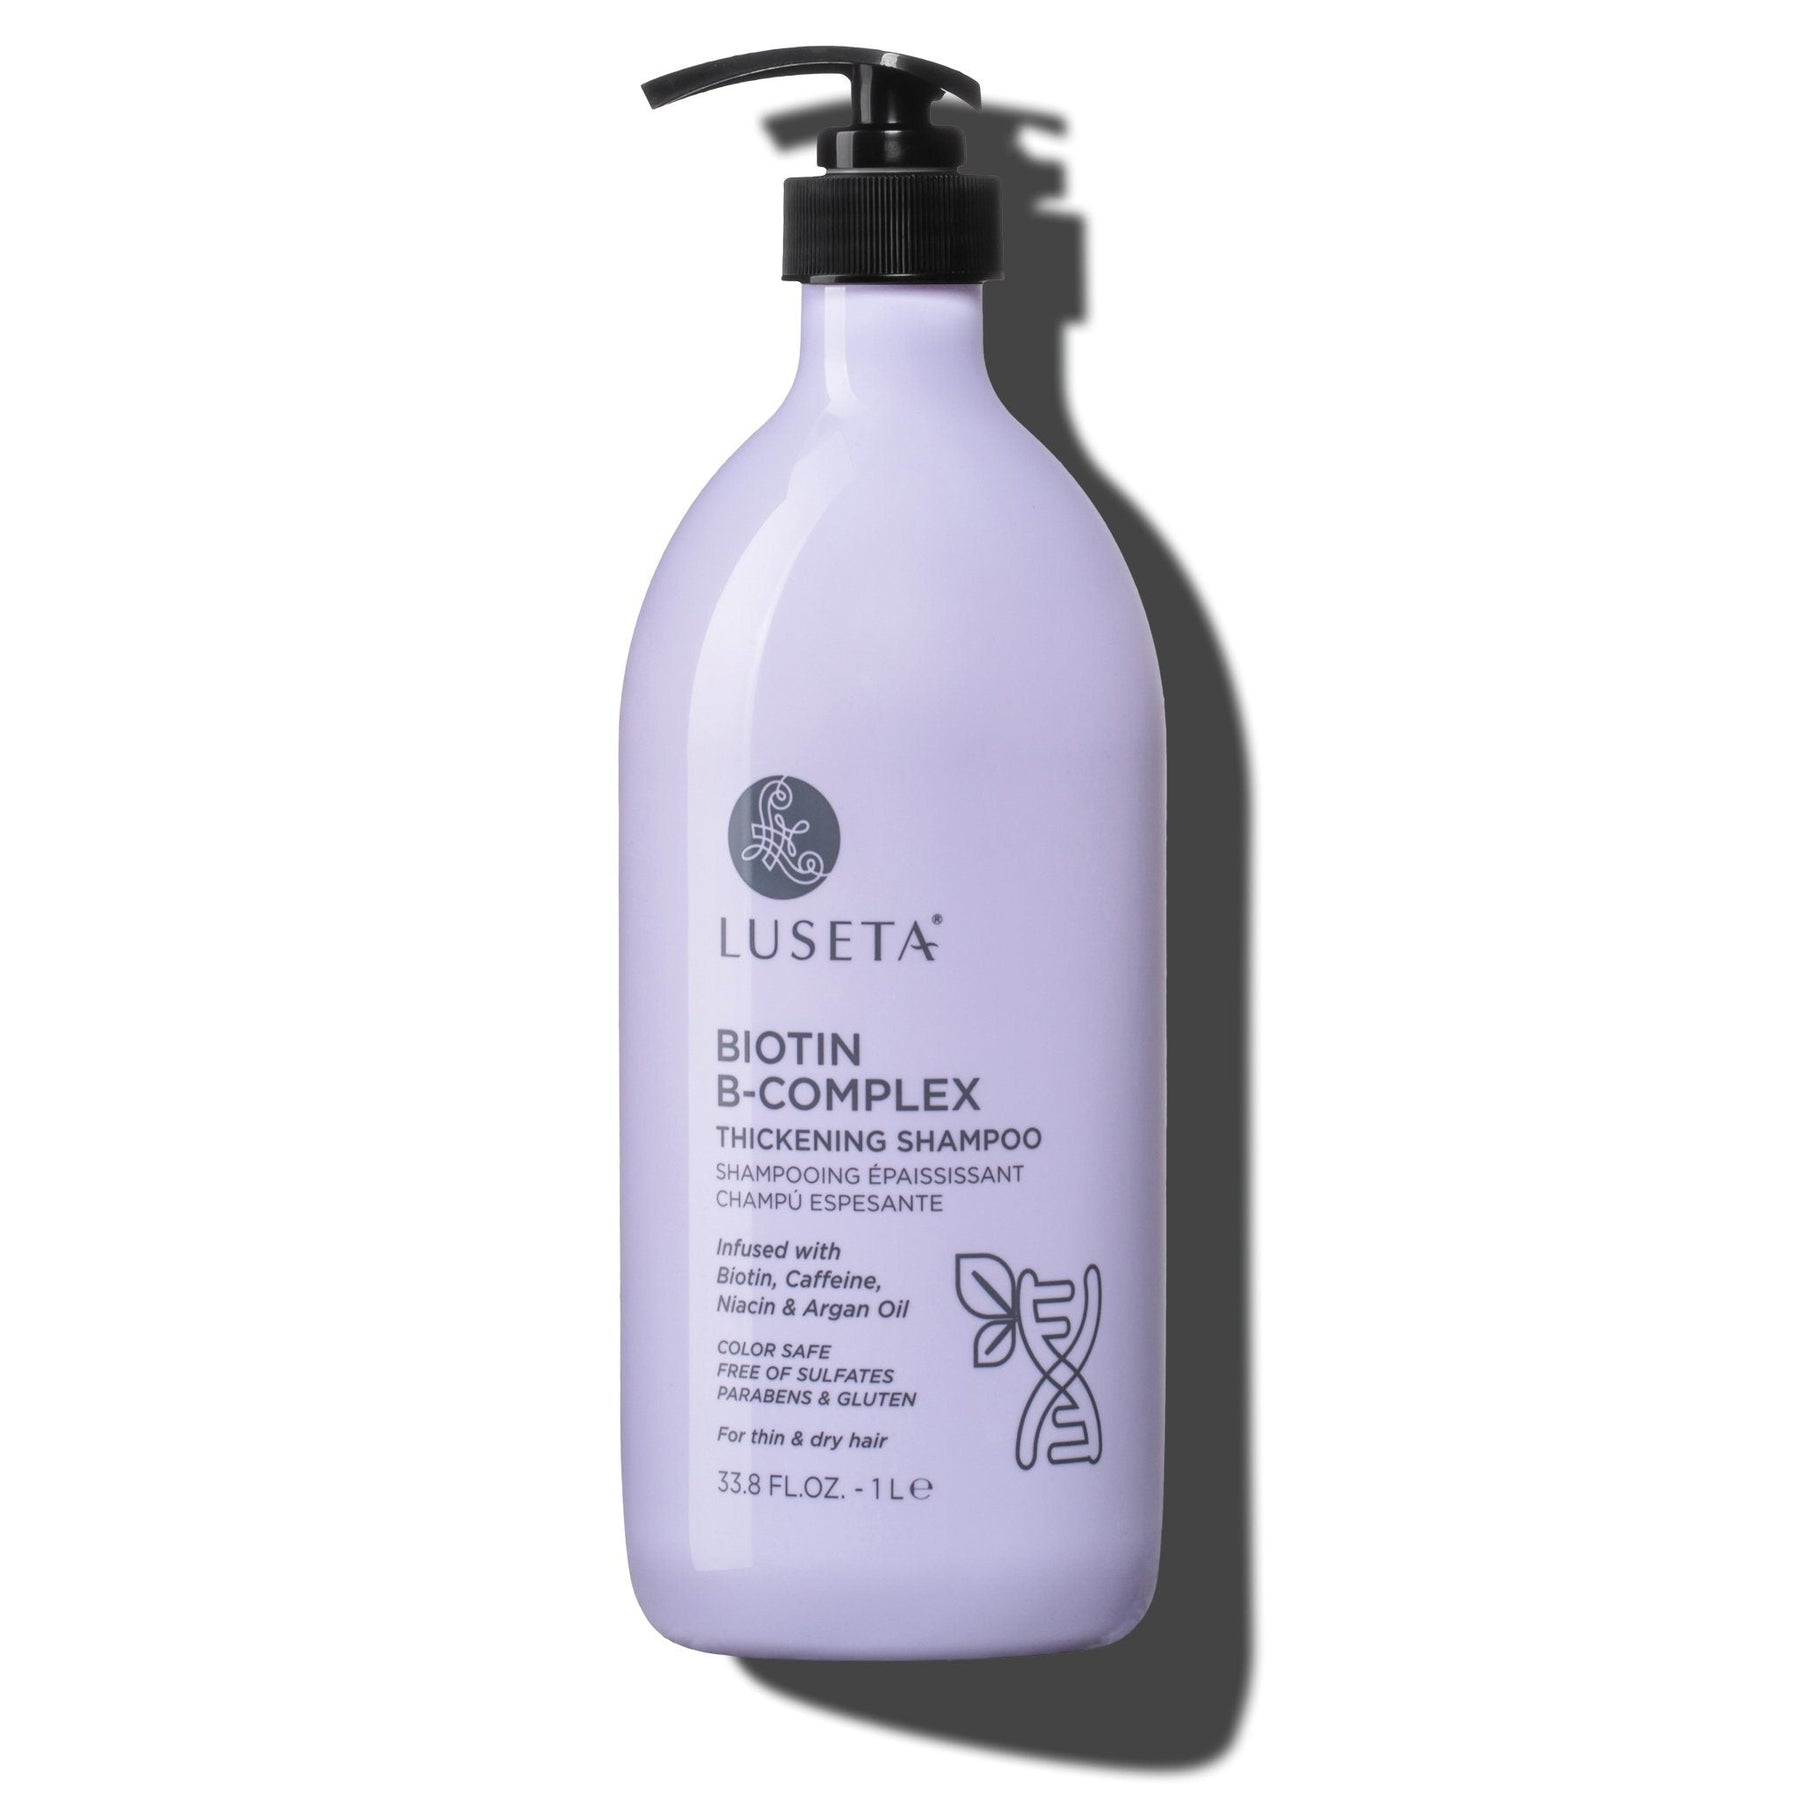 Biotin B-Complex Thickening Shampoo - 33.8oz - by Luseta Beauty |ProCare Outlet|